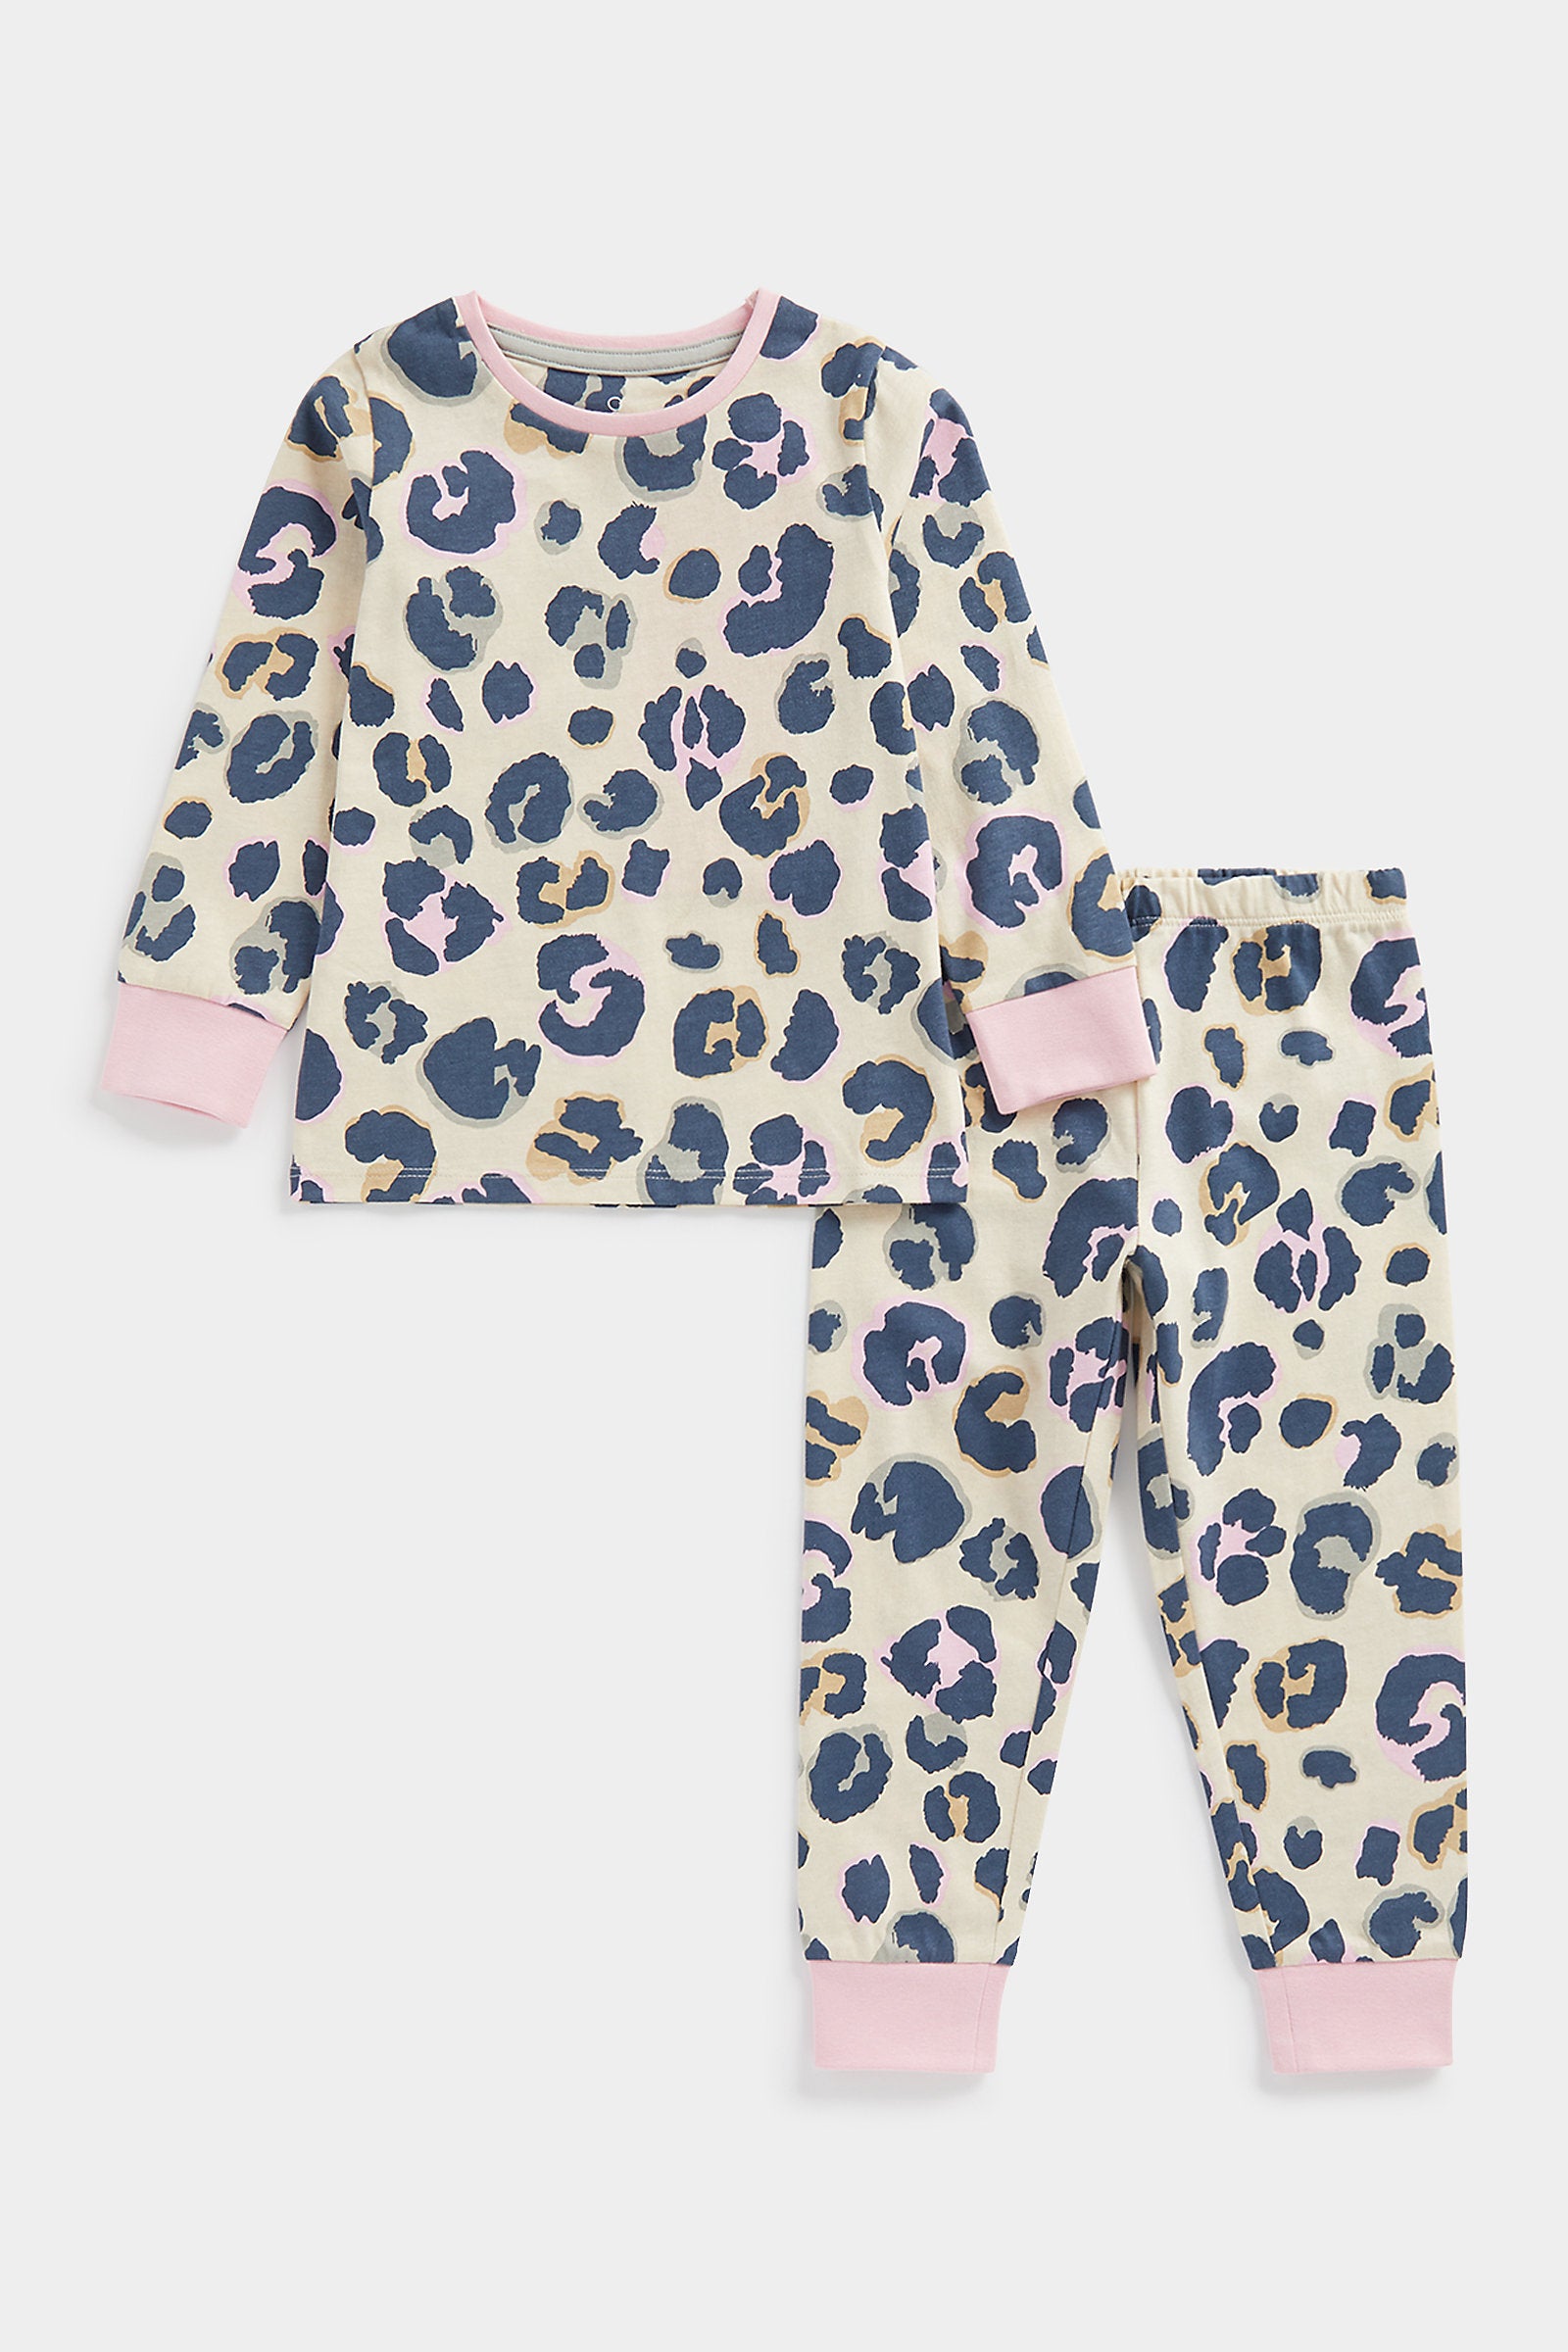 Buy Mothercare Leopard-Print Pyjamas Online in Malaysia | Mothercare 👶